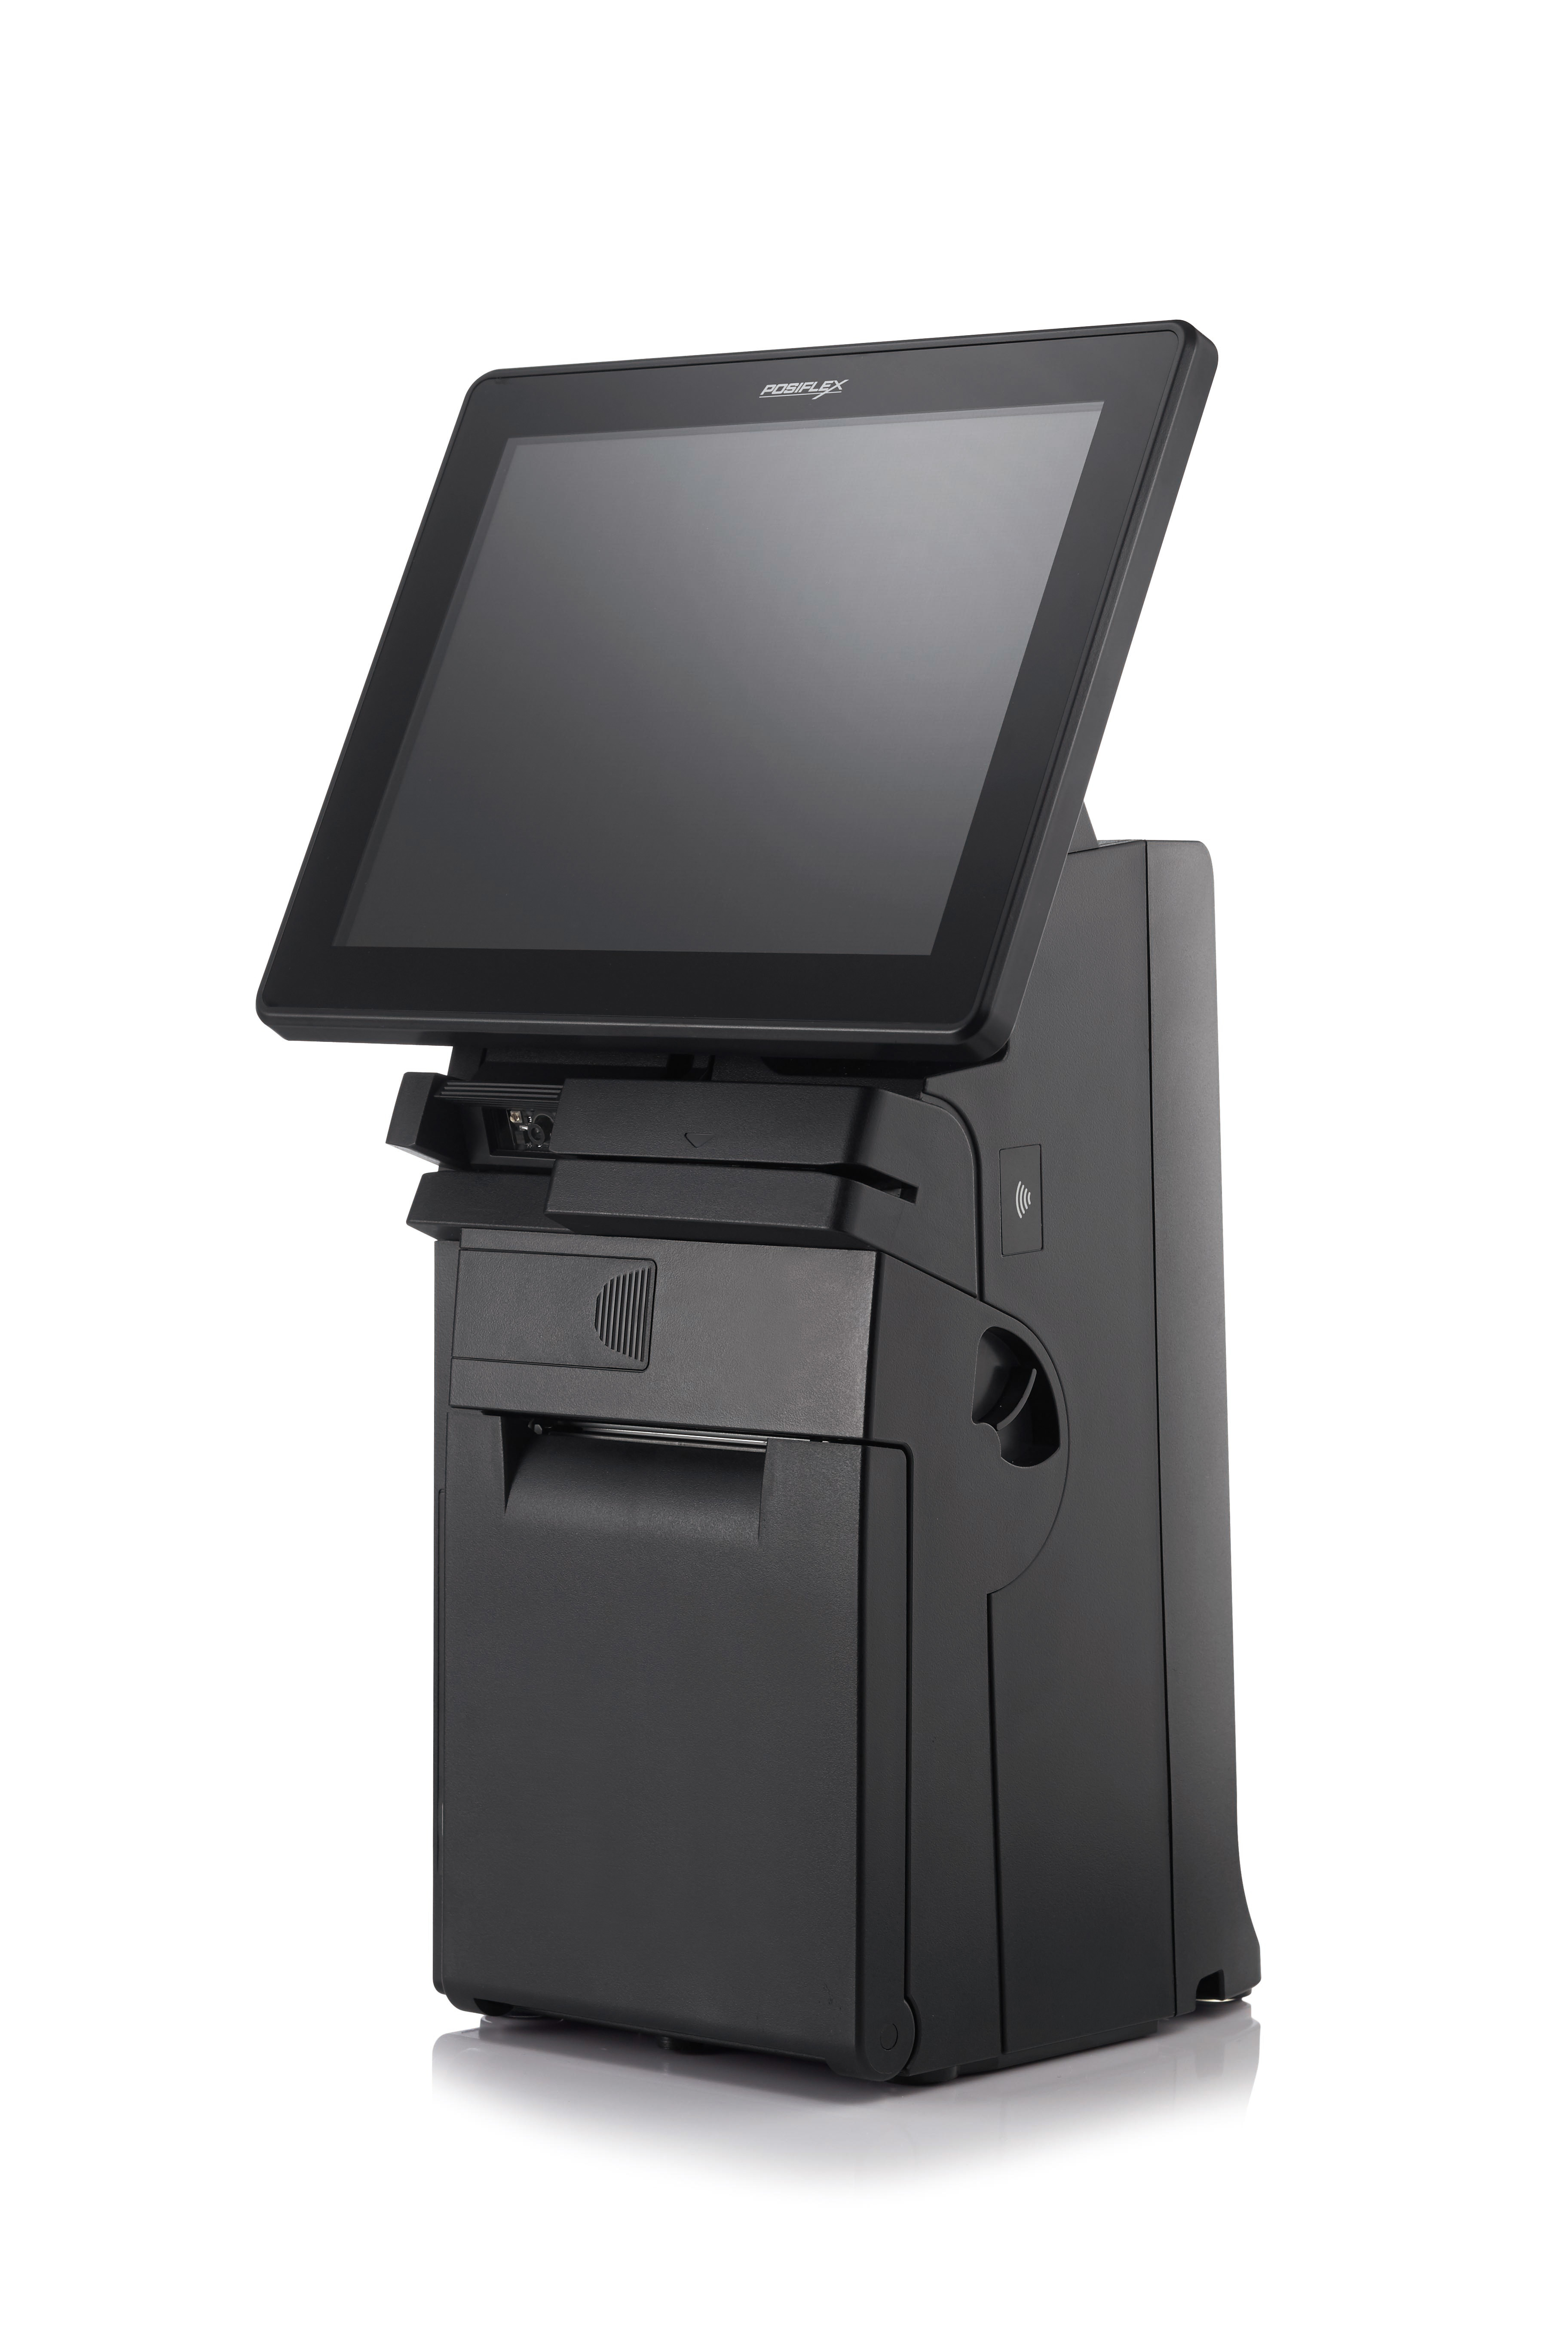 Posiflex Announces Latest All In One Pos At Retailtech Japan 2016